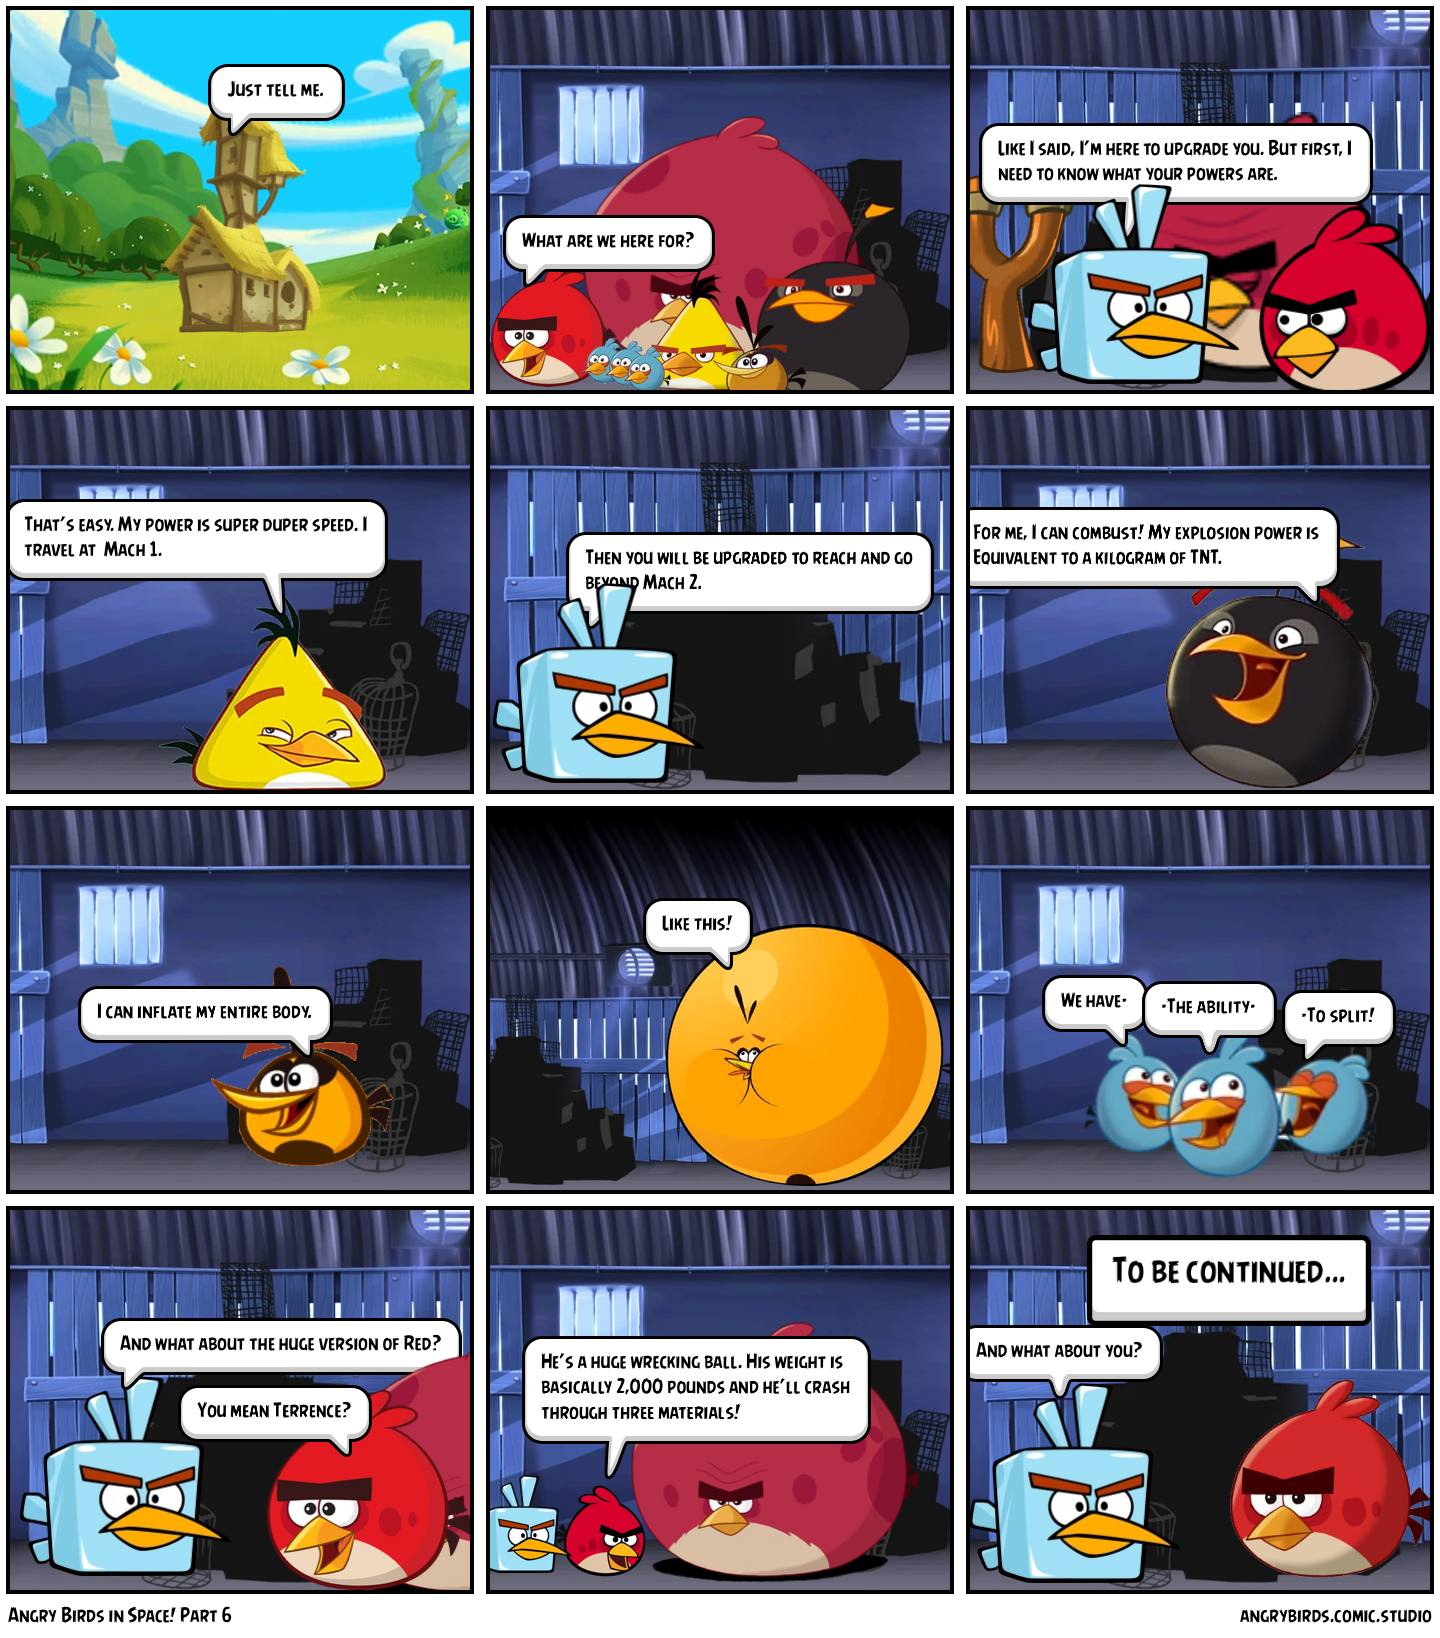 bubbles angry birds